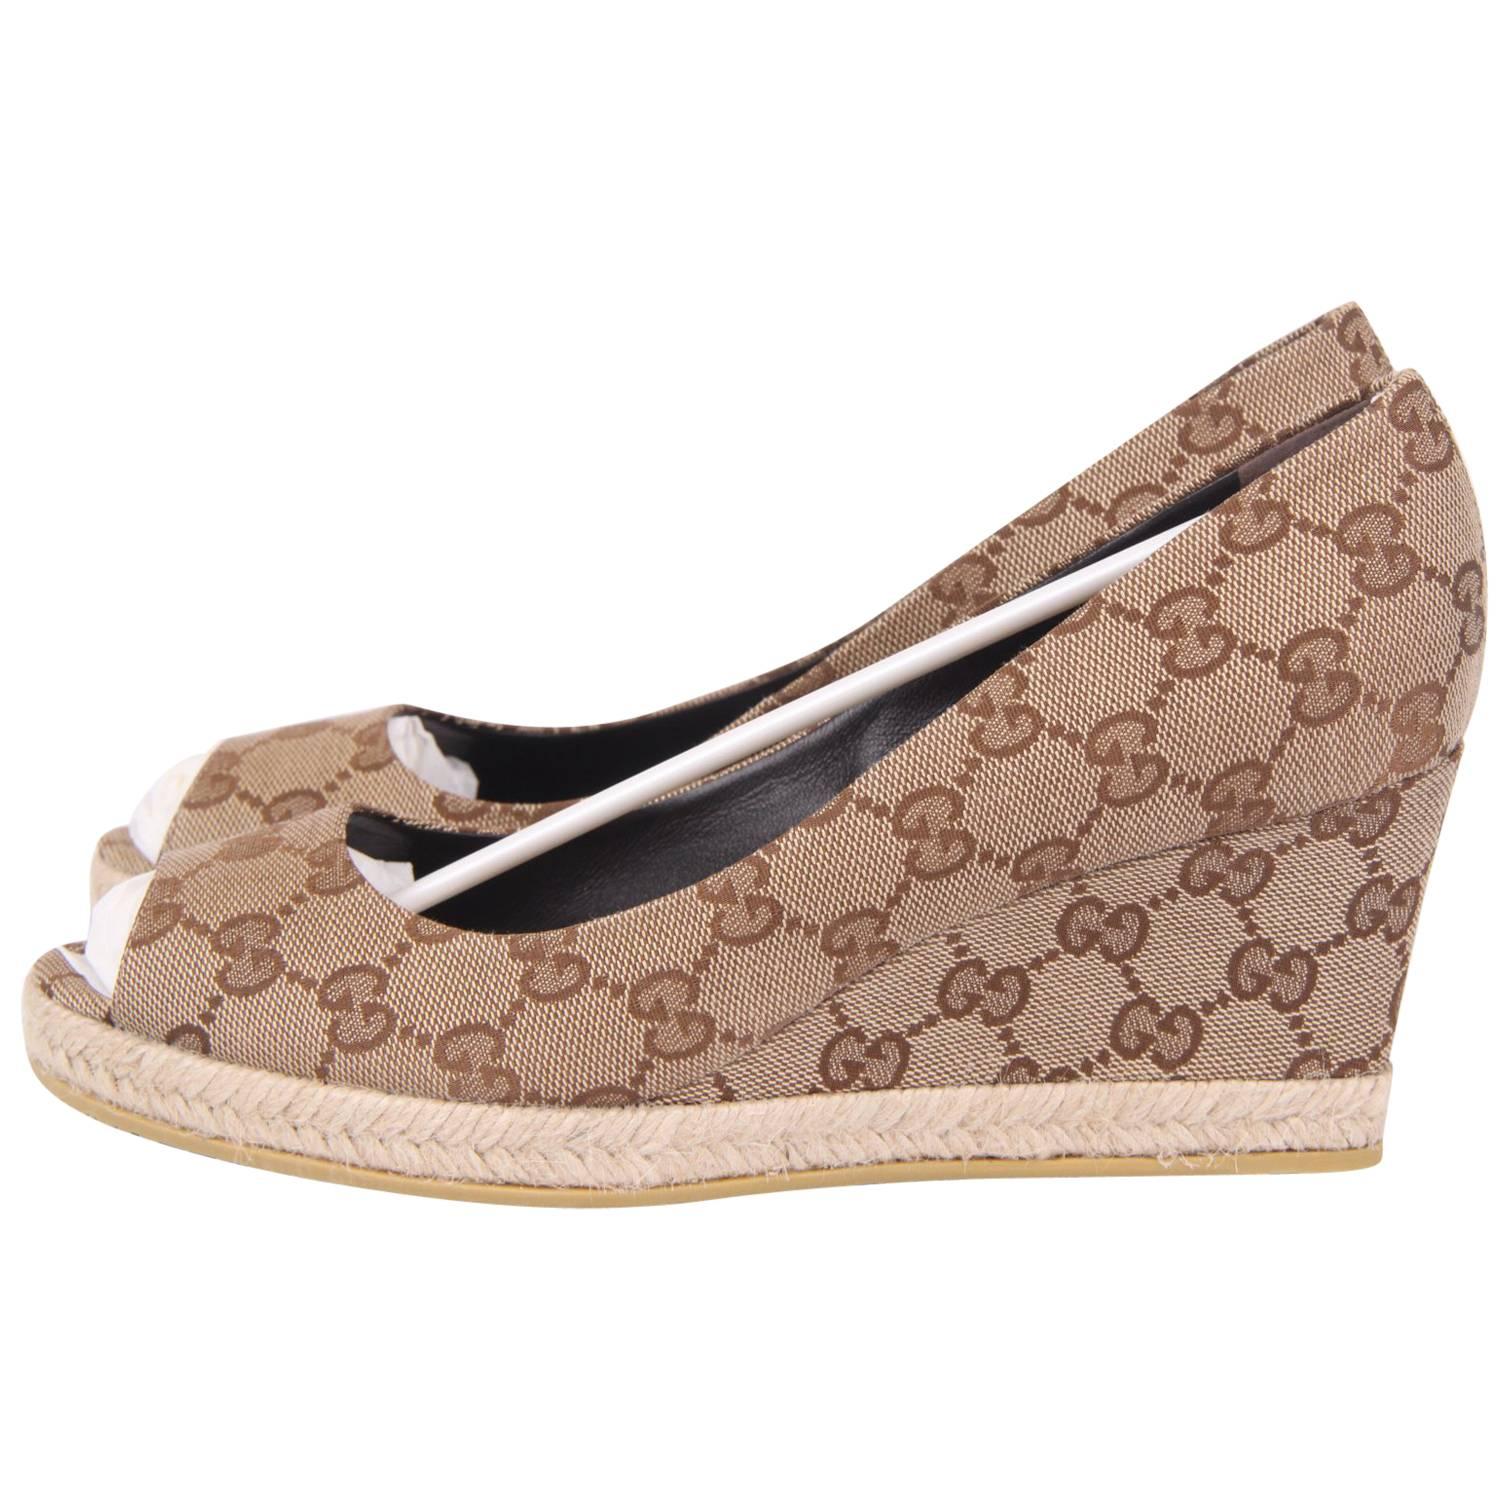 Gucci Canvas Peep Toe Wedge Shoes - beige ebony For Sale